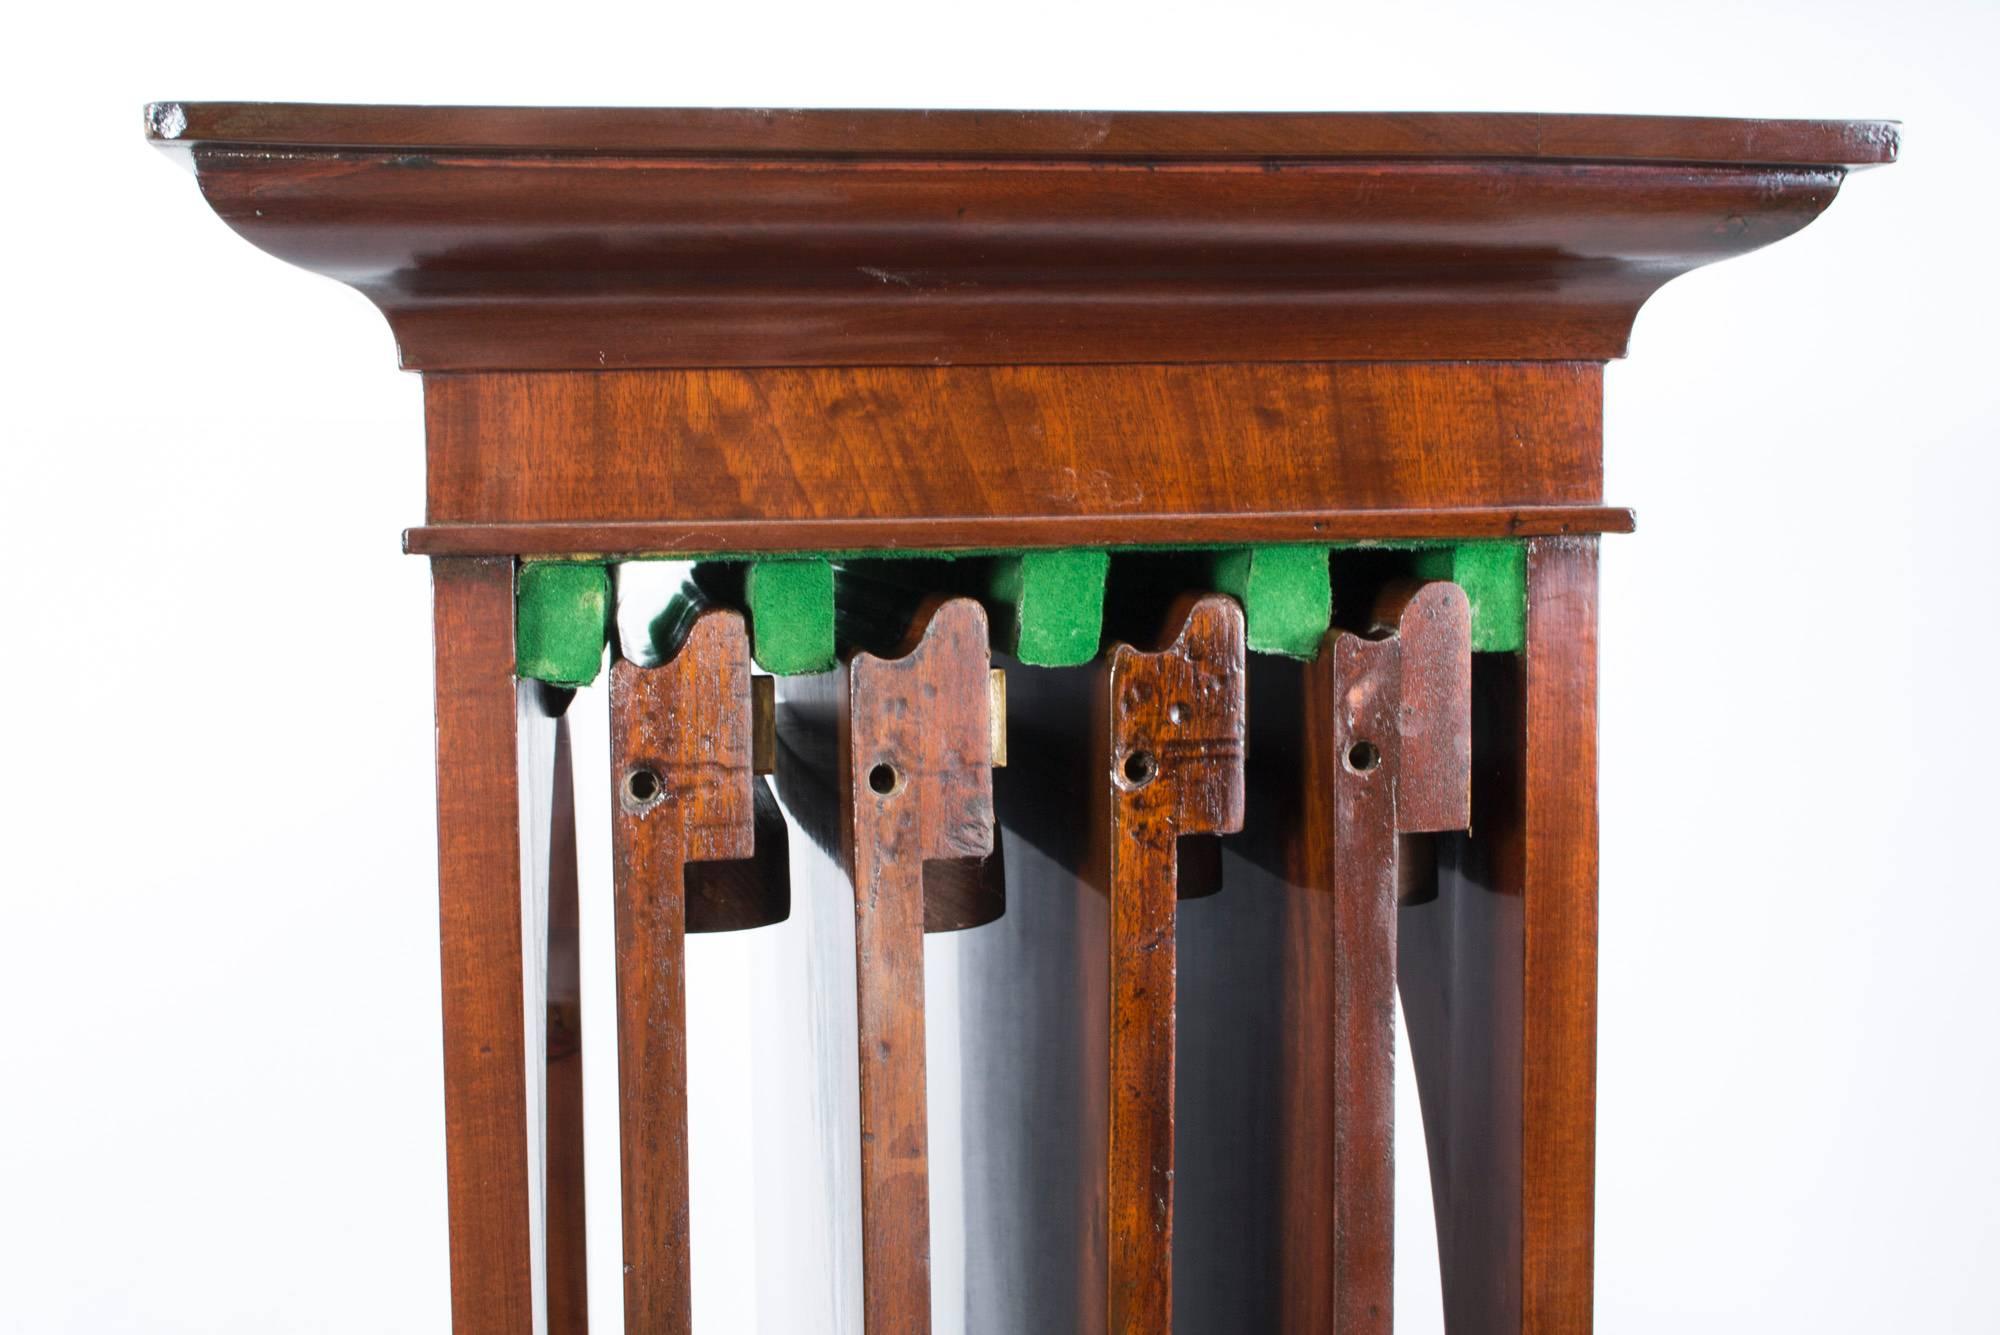 British Antique Victorian Dining Table and Leaf Holder, circa 1850